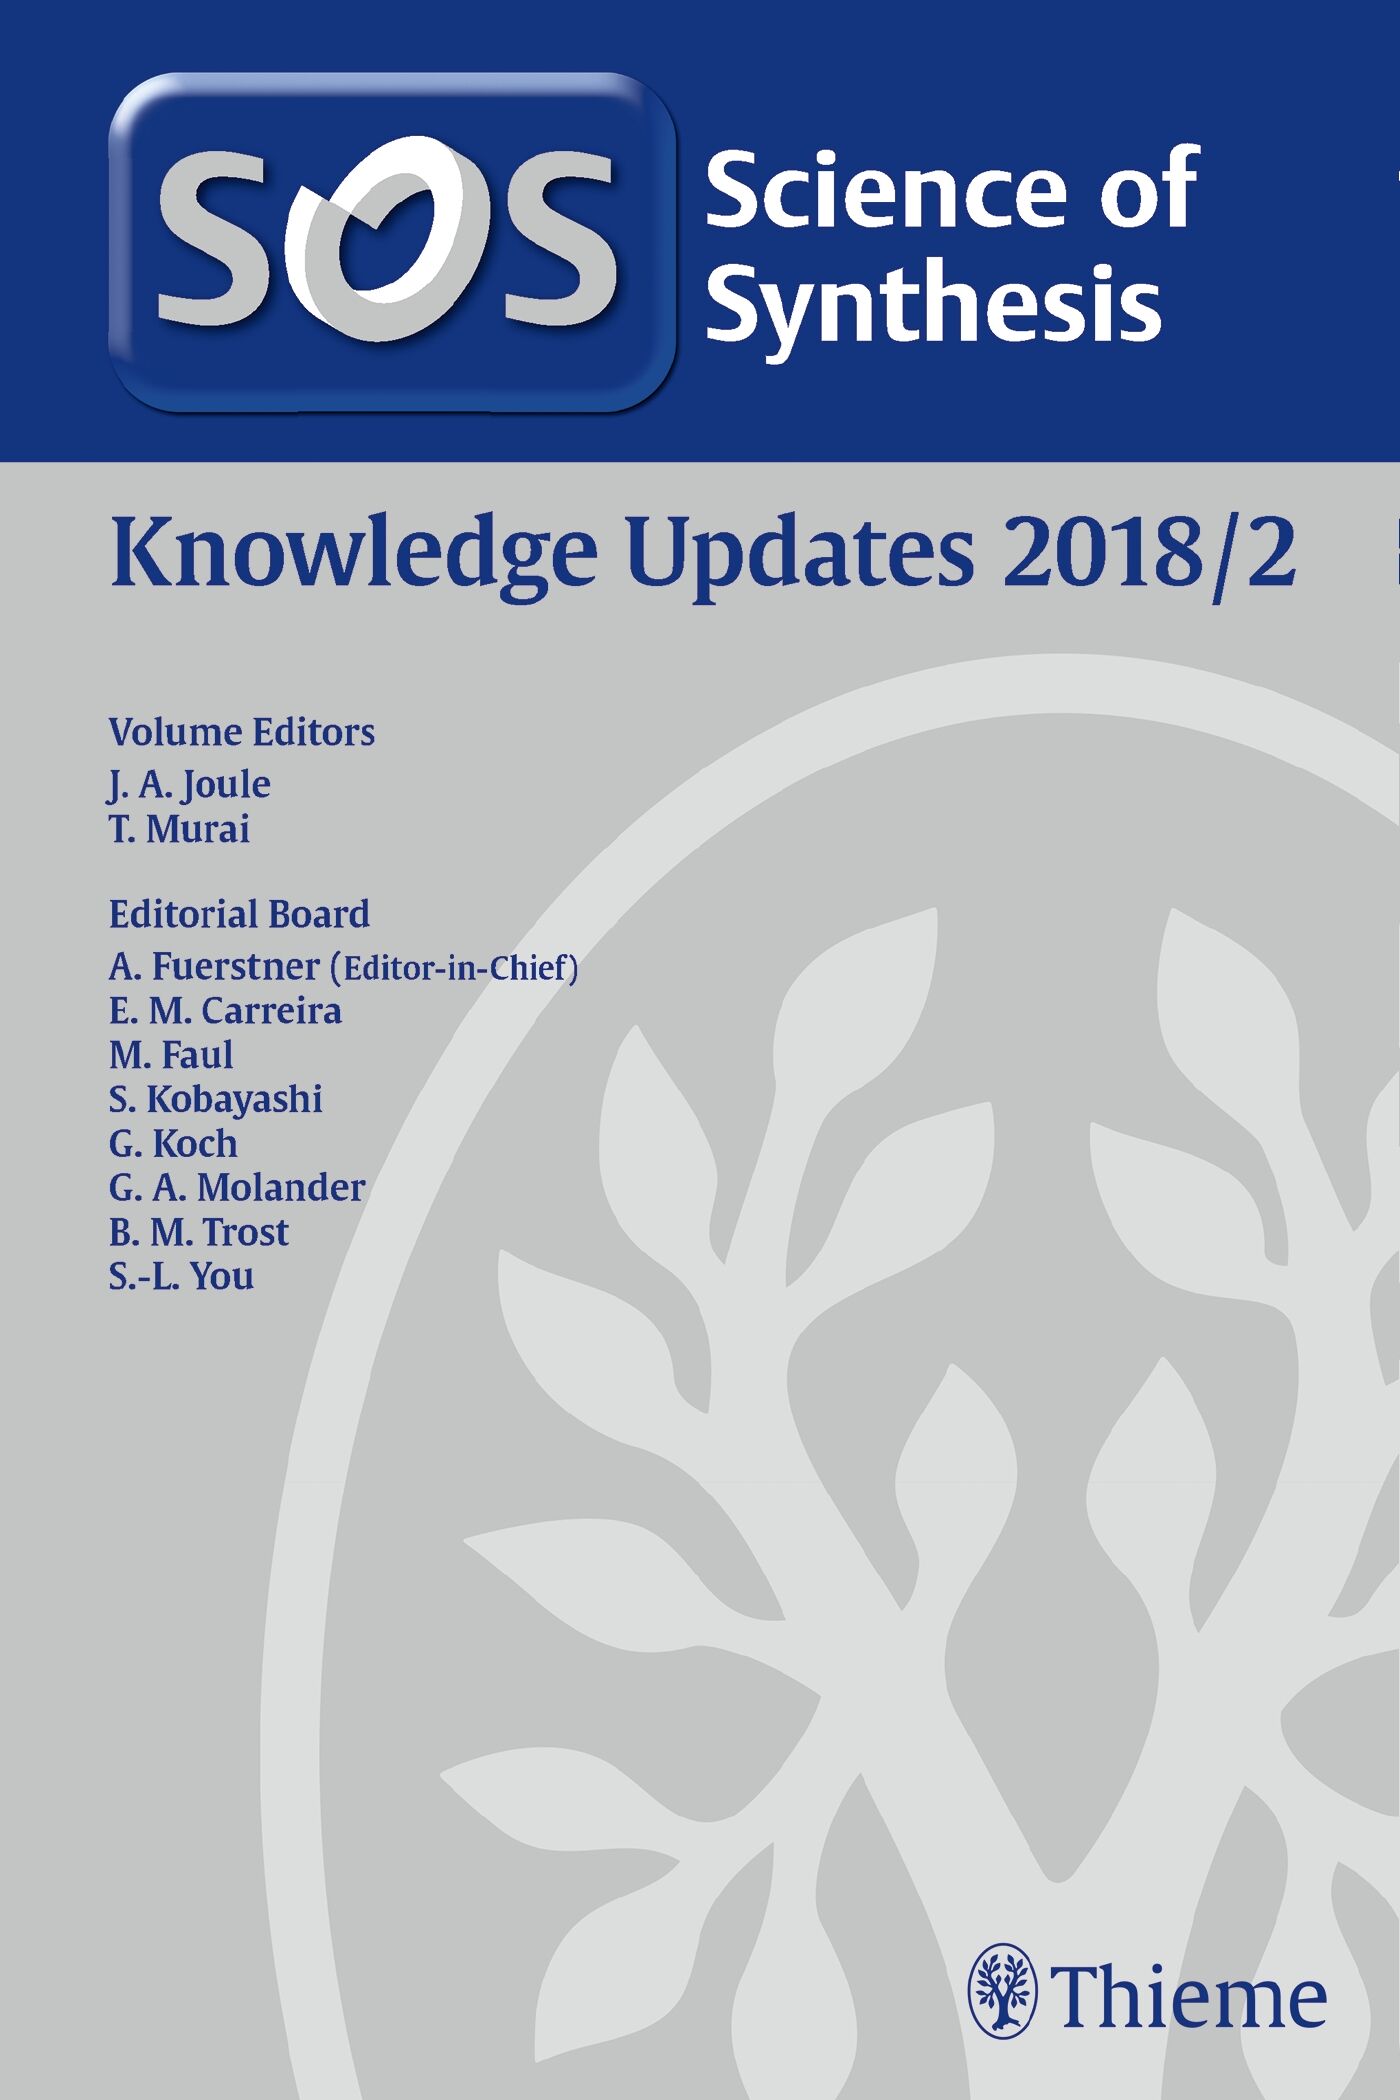 Science of Synthesis: Knowledge Updates 2018 Vol. 2, 9783132423183